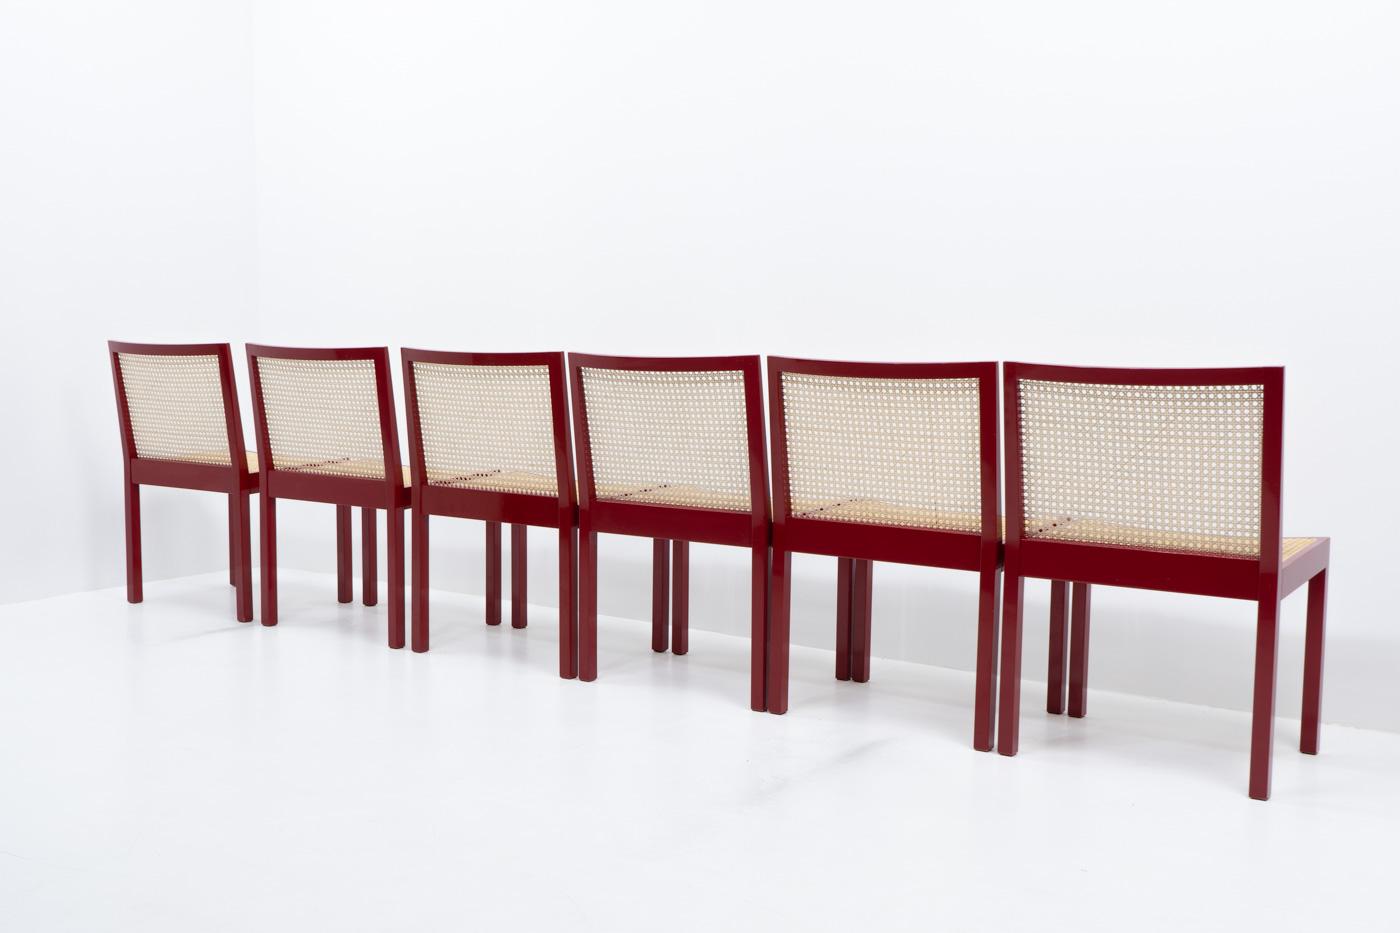 Cane Swiss Design Bank Stühle, or Bench Chairs by Willy Guhl, Set of six, 1960s For Sale